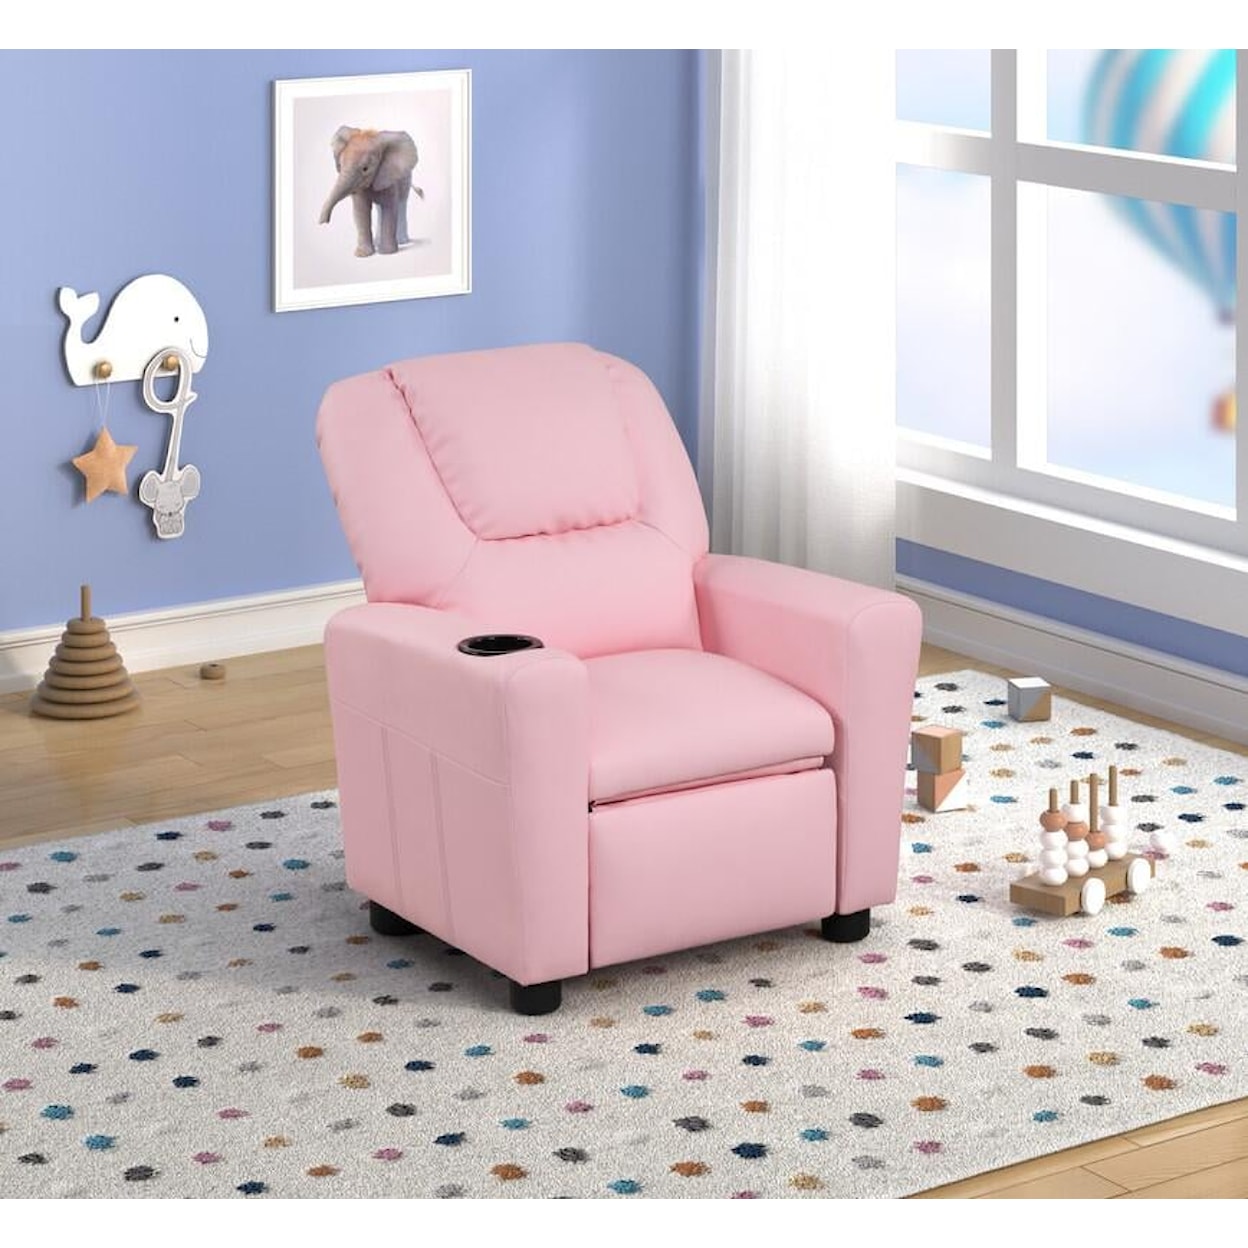 Lilola Home Youth Recliner YOUTH PINK PU KIDS RECLINER |